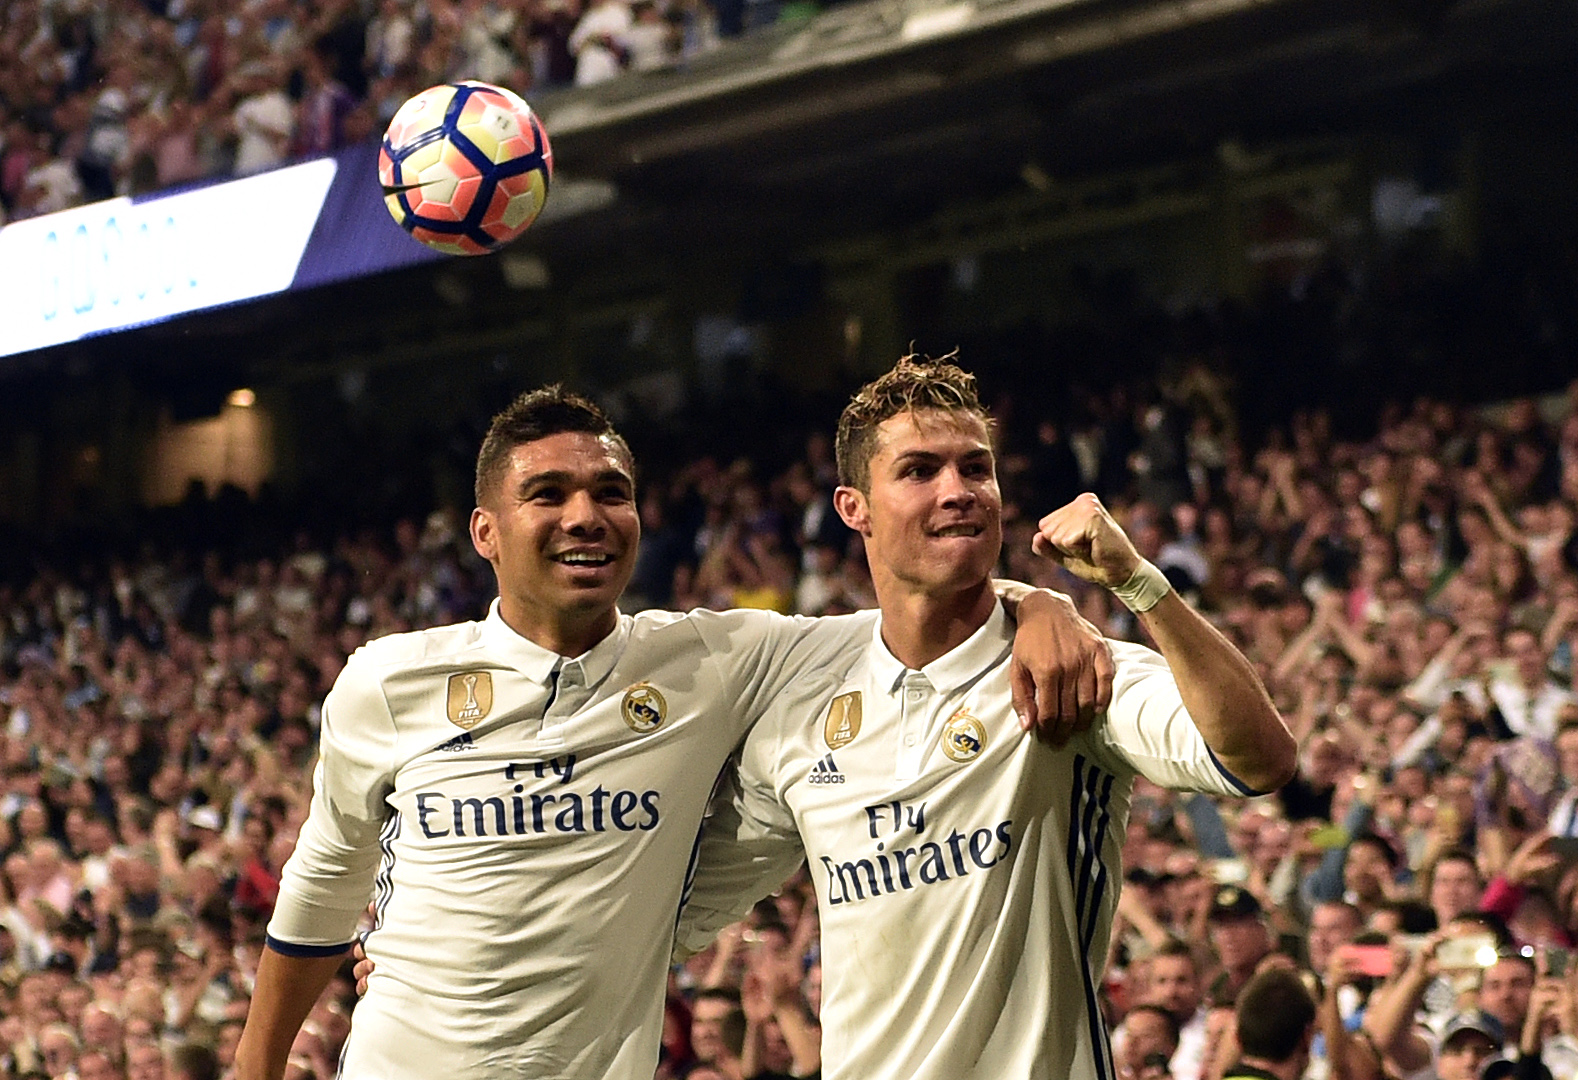 Real Madrid's Portuguese forward Cristiano Ronaldo (R) celebrates a goal with Real Madrid's Brazilian midfielder Casemiro during the Spanish league football match Real Madrid CF vs Sevilla FC at the Santiago Bernabeu stadium in Madrid on May 14, 2017. / AFP PHOTO / GERARD JULIEN        (Photo credit should read GERARD JULIEN/AFP/Getty Images)